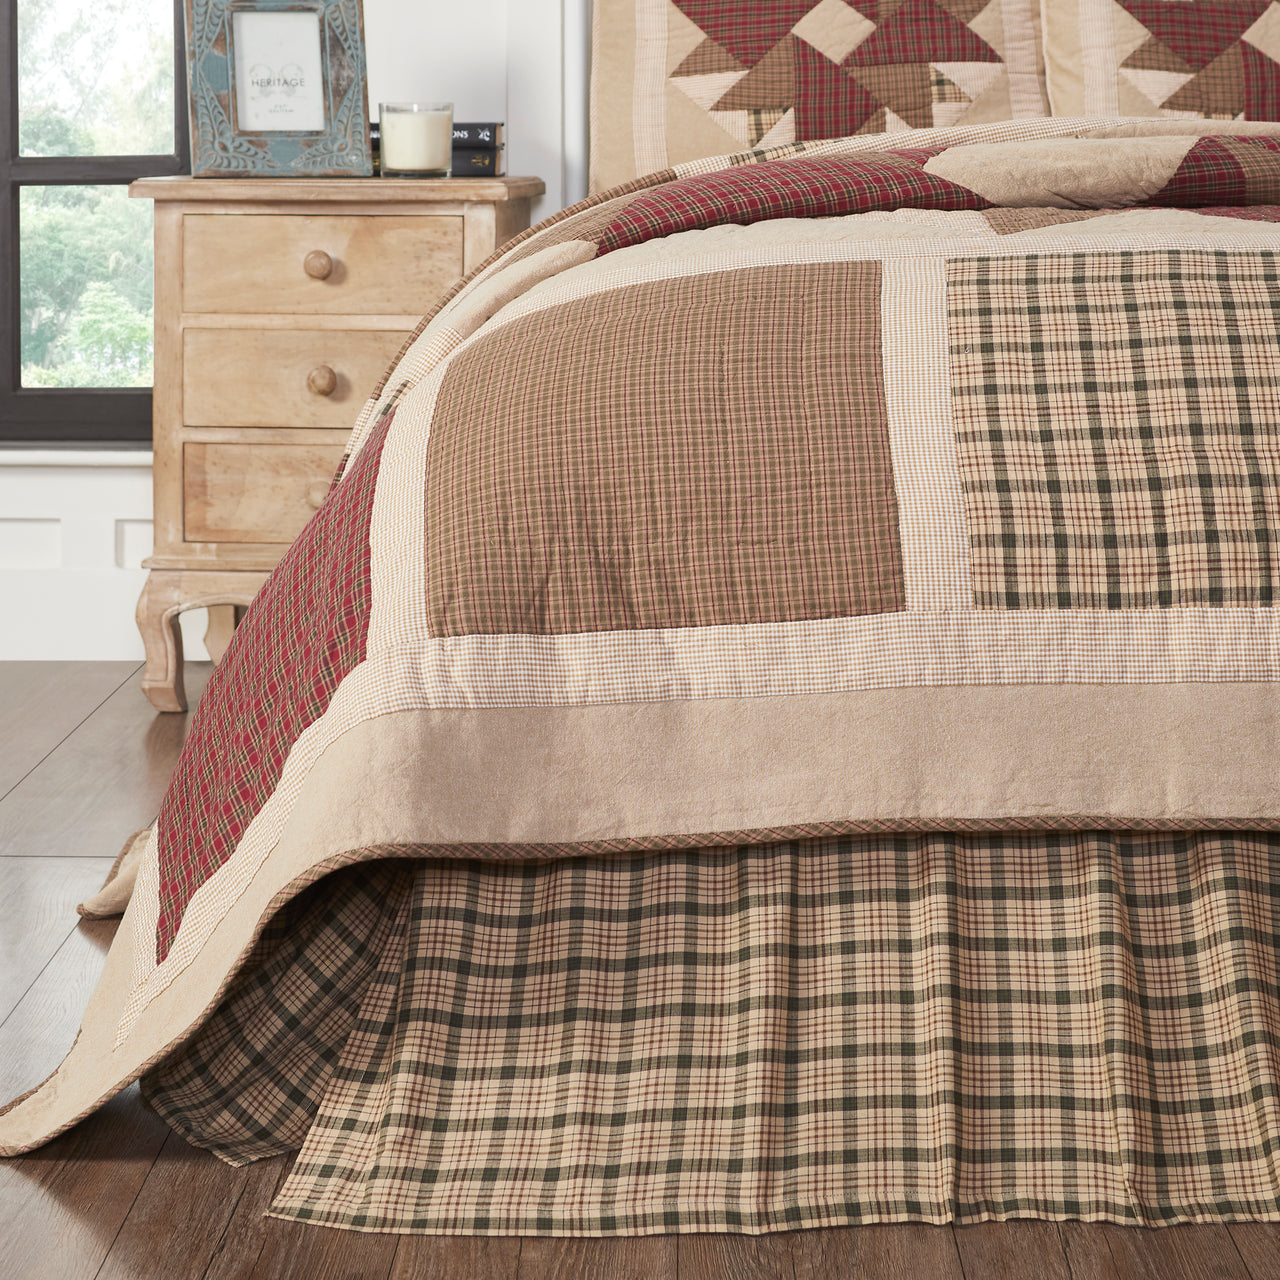 Cider Mill Twin Bed Skirt 39x76x16 VHC Brands